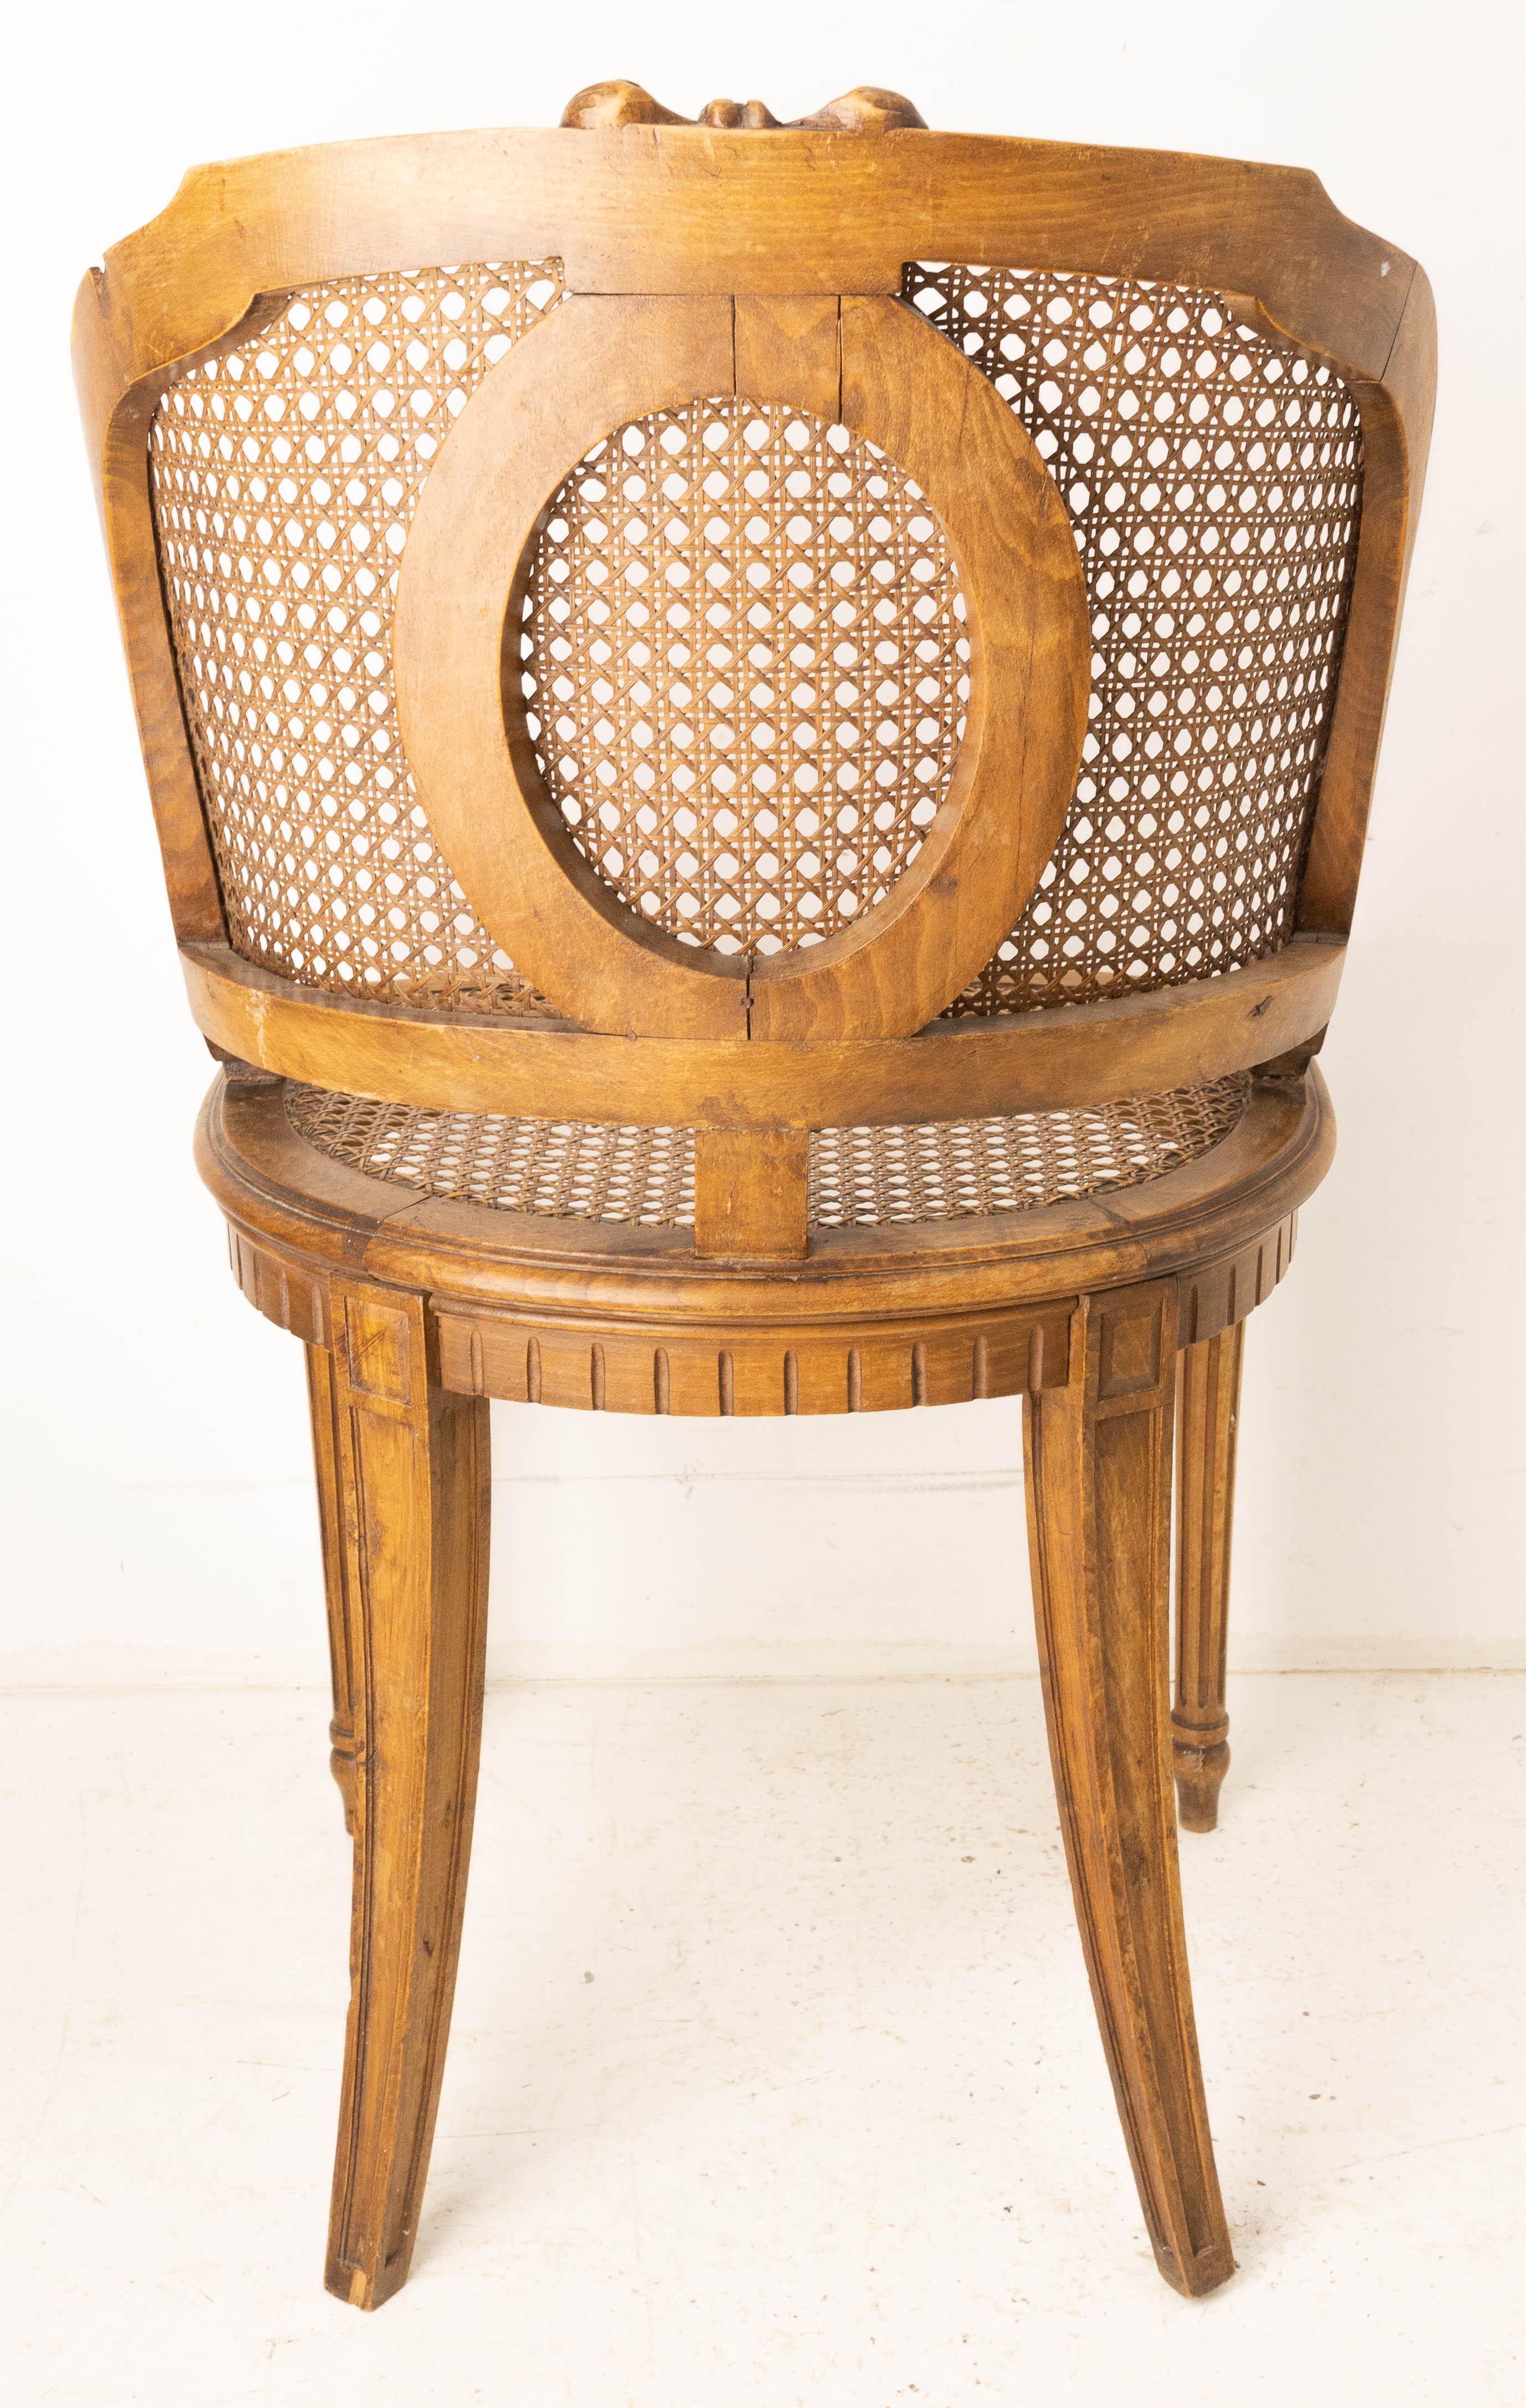 20th Century Chair Beech and Cane in the Louis XVI Style, French, circa 1900